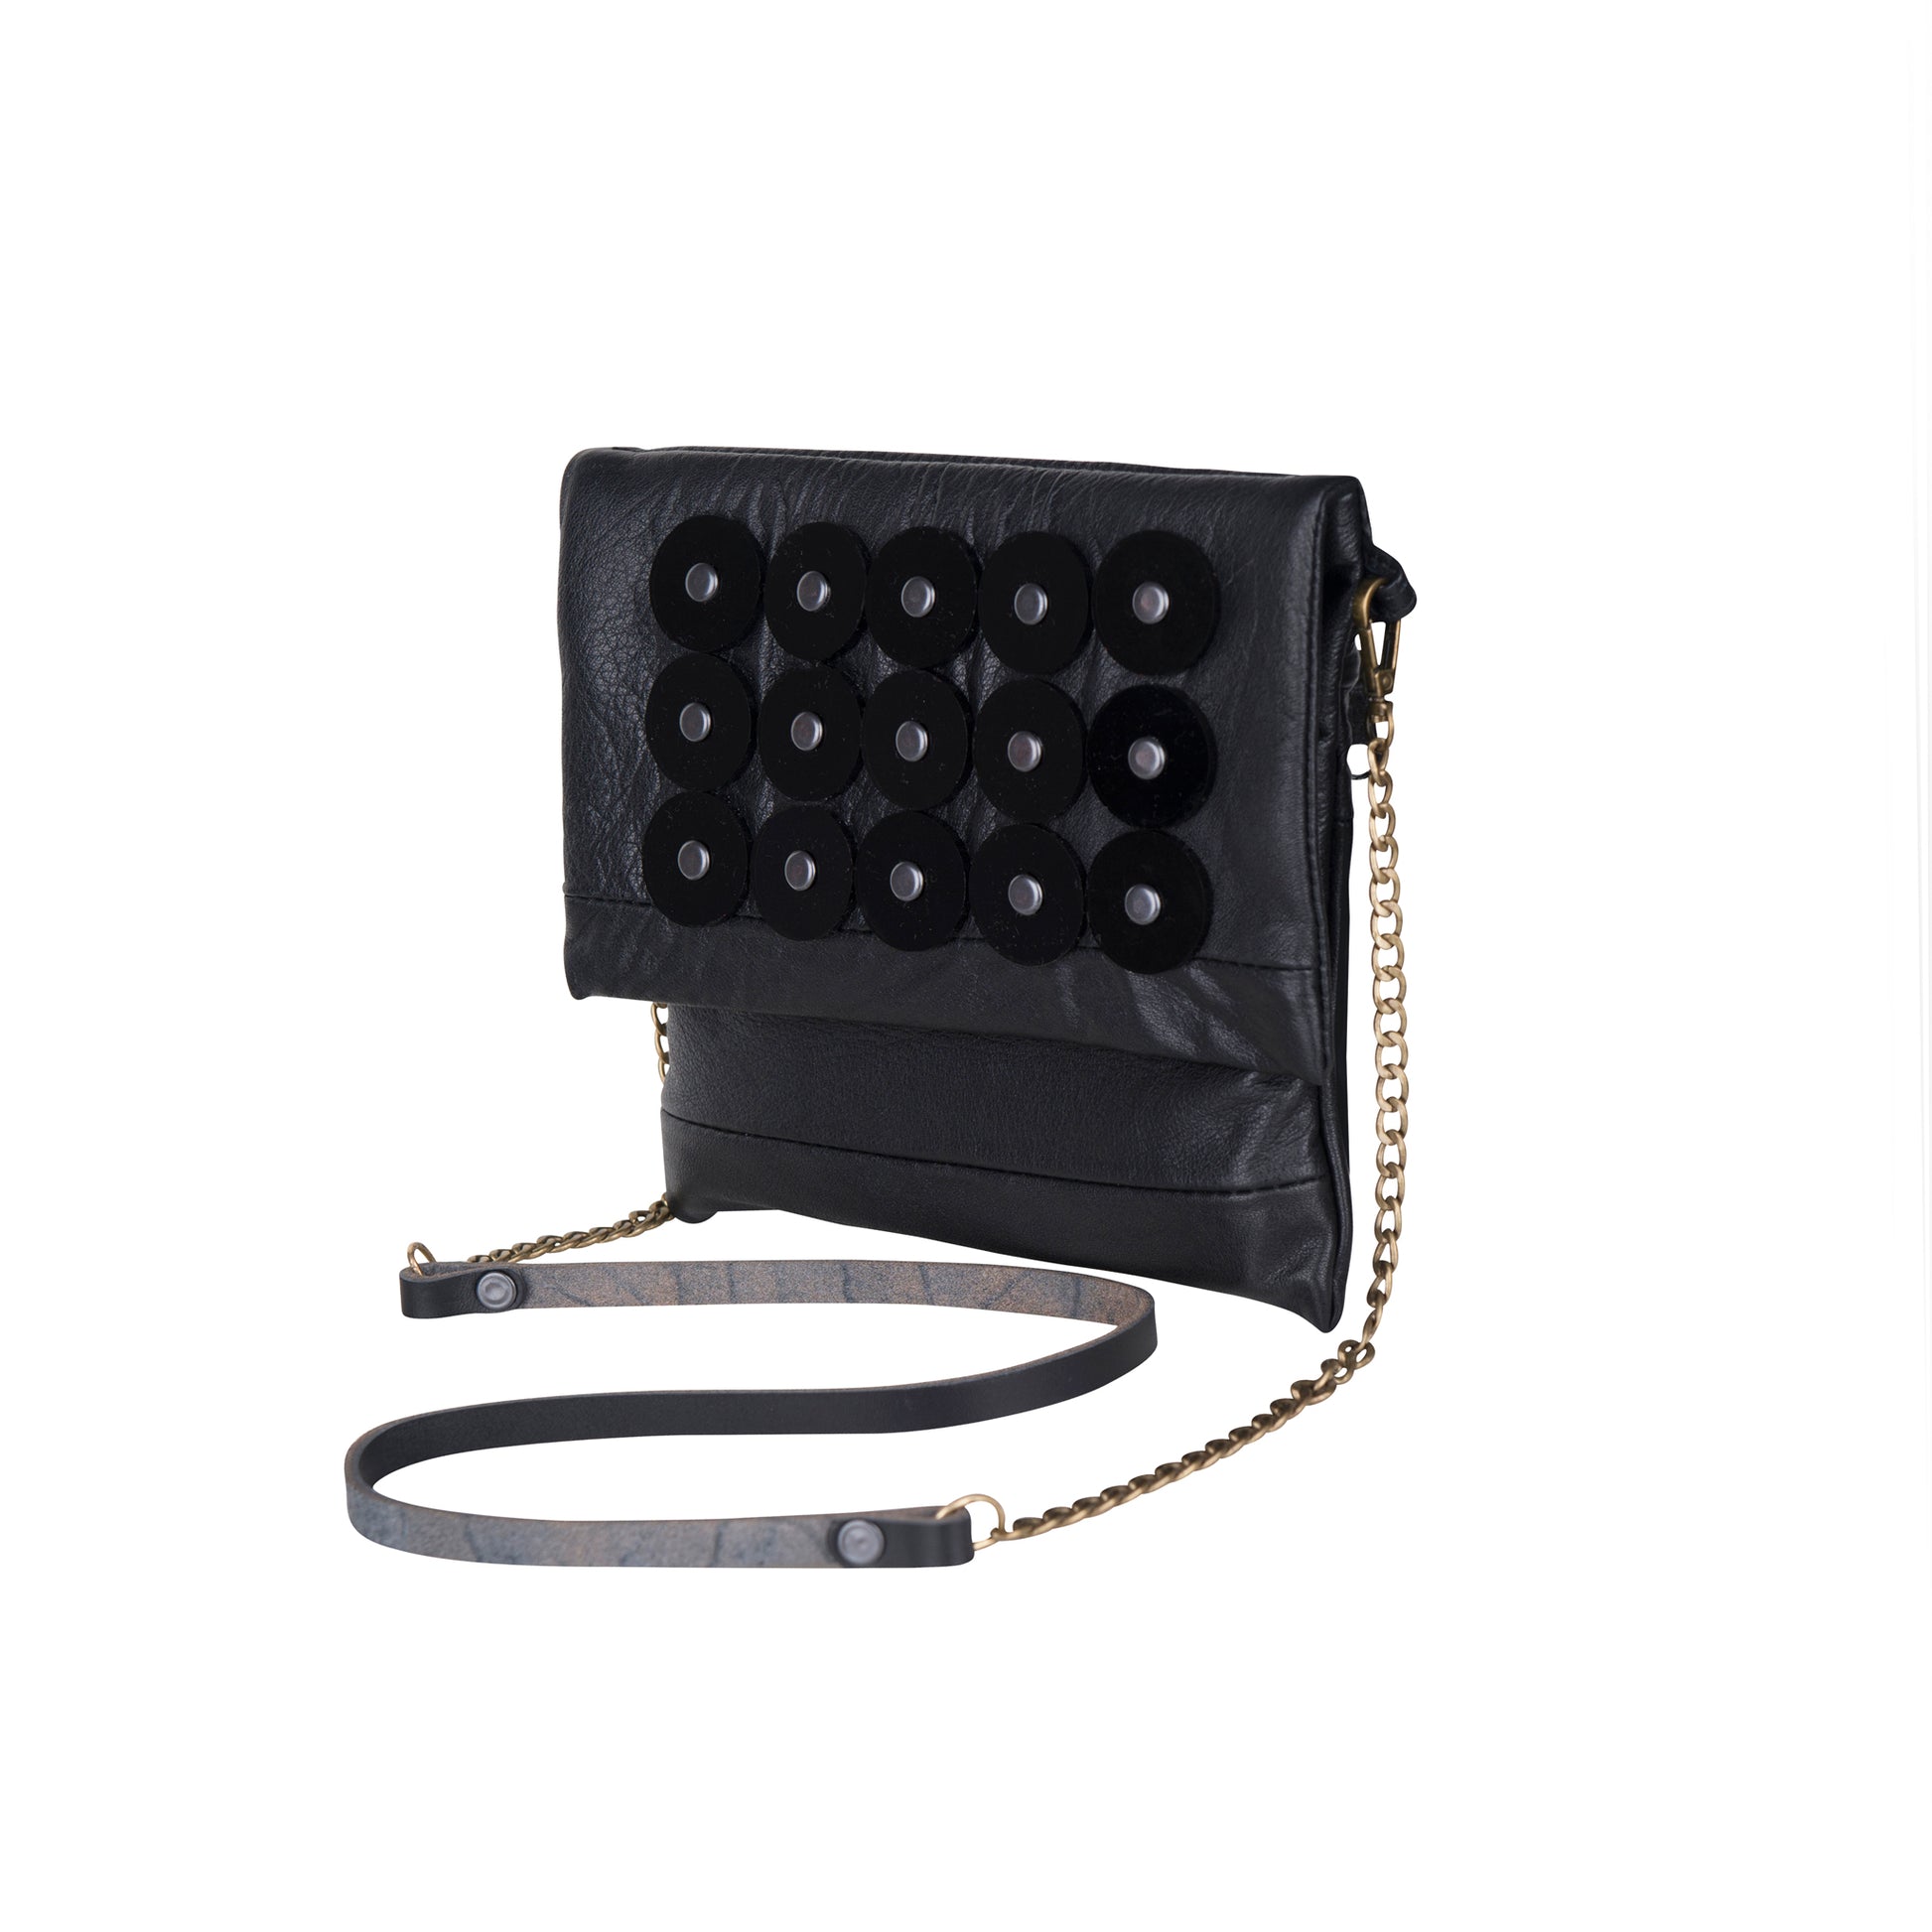 METANoIA black recycled leather small handbag with black circle acrylic forms fashioned into a repeative fashion with a smaller circle overlay on each form. 